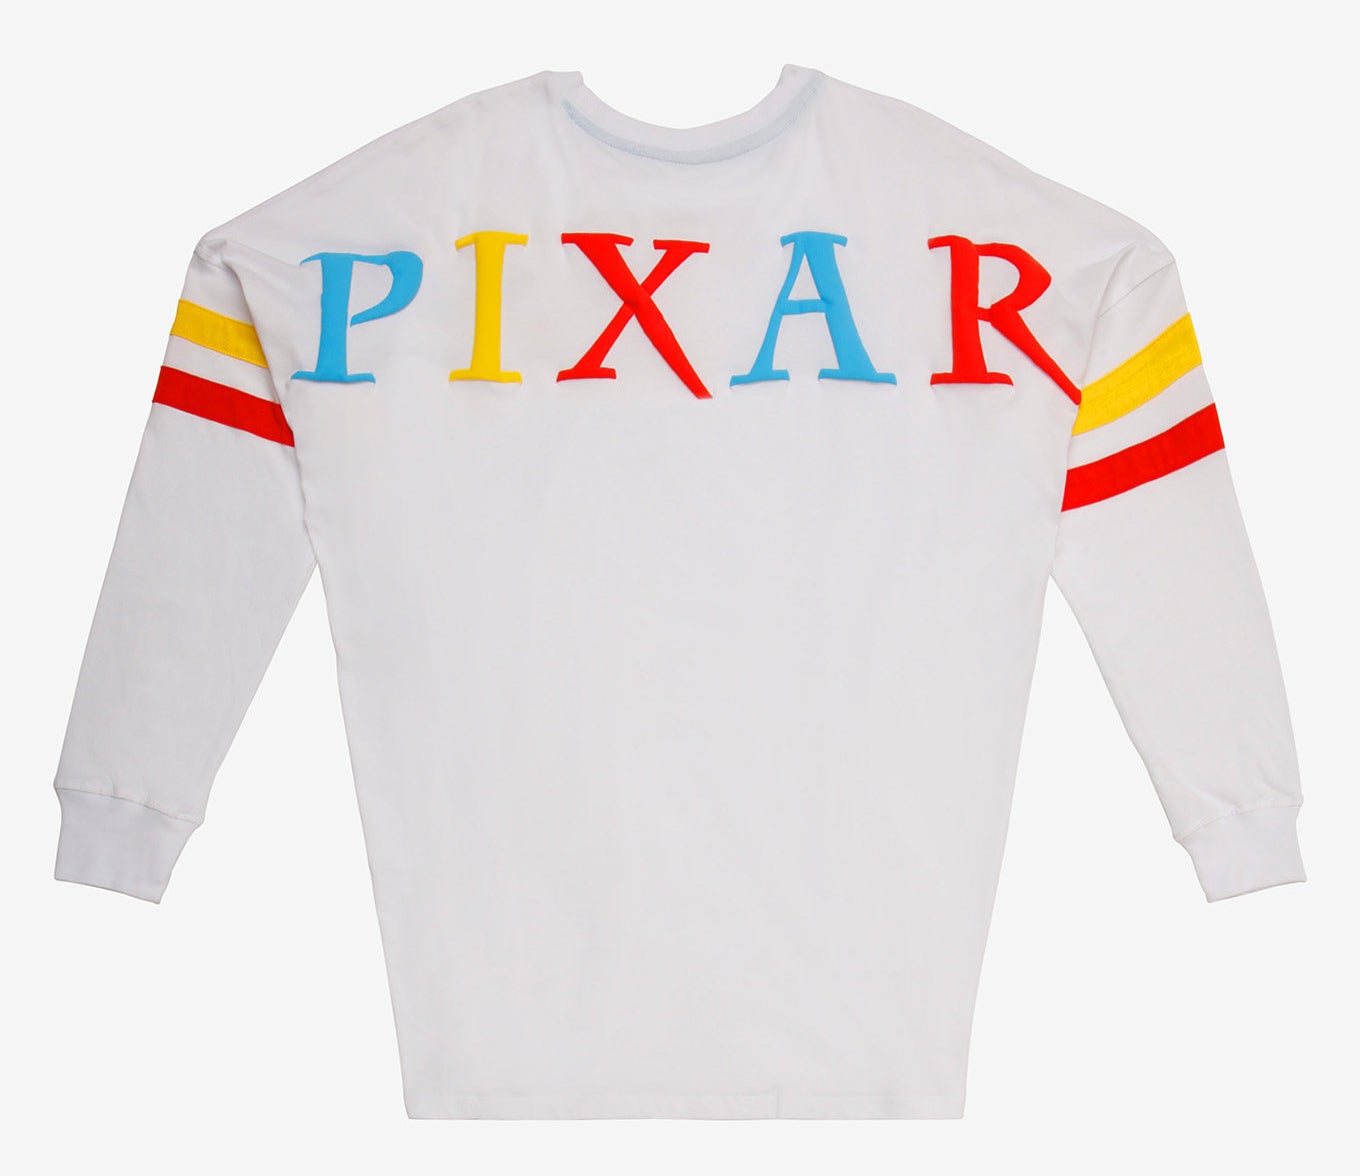 the back of the shirt with &quot;pixar&quot; written in all caps and blue, yellow, and red alternating letters